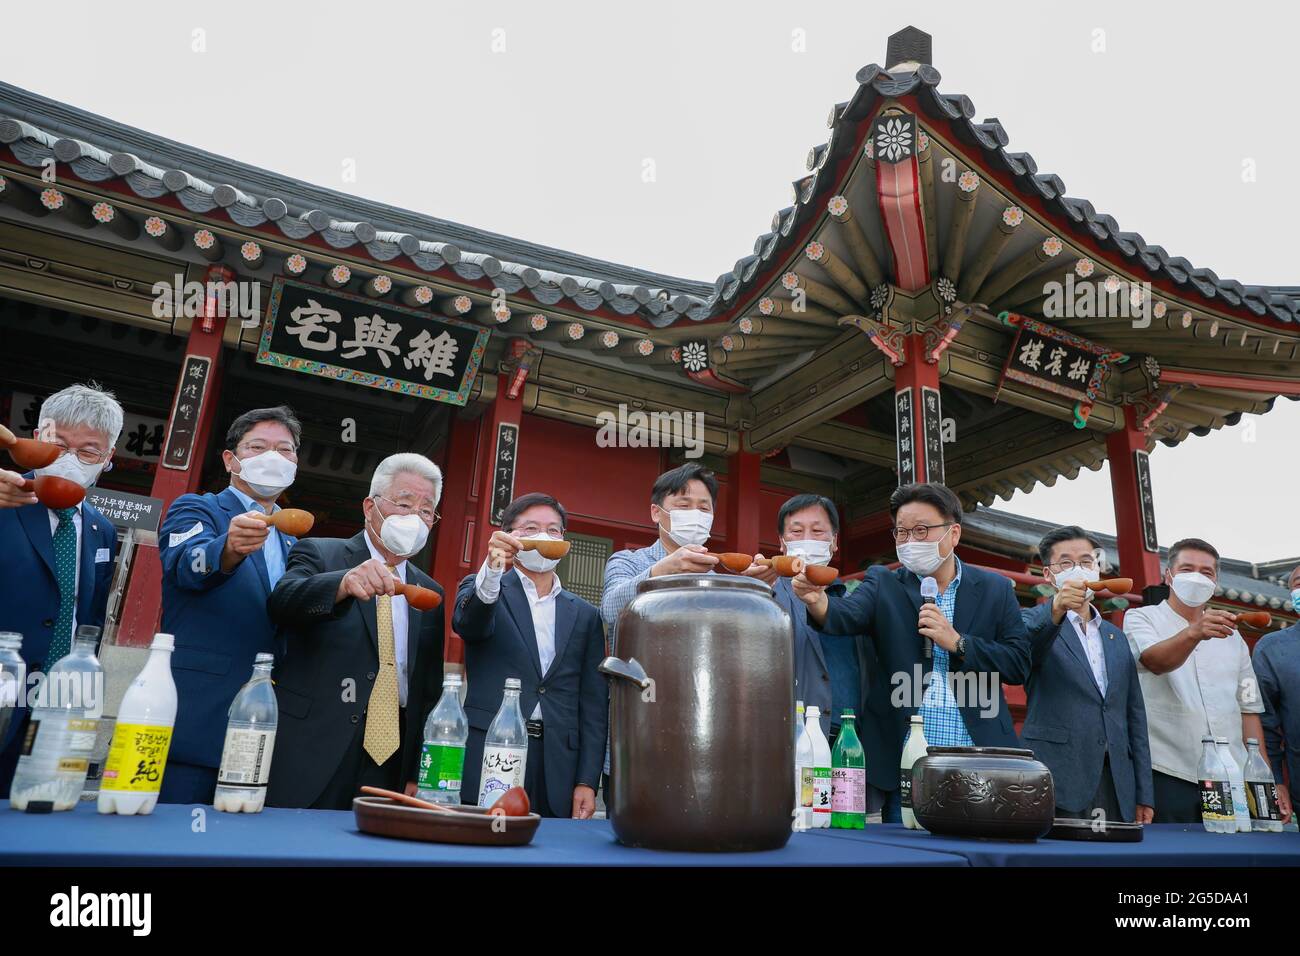 Suwon, South Korea. 26th June, 2021. Guests have a toast during a celebration ceremony at Hwaseong Haenggung Palace in Suwon, South Korea, June 26, 2021. Makgeolli, a traditional Korean alcoholic beverage made from rice, has been listed as South Korea's national intangible cultural heritage recently. Credit: Wang Jingqiang/Xinhua/Alamy Live News Stock Photo